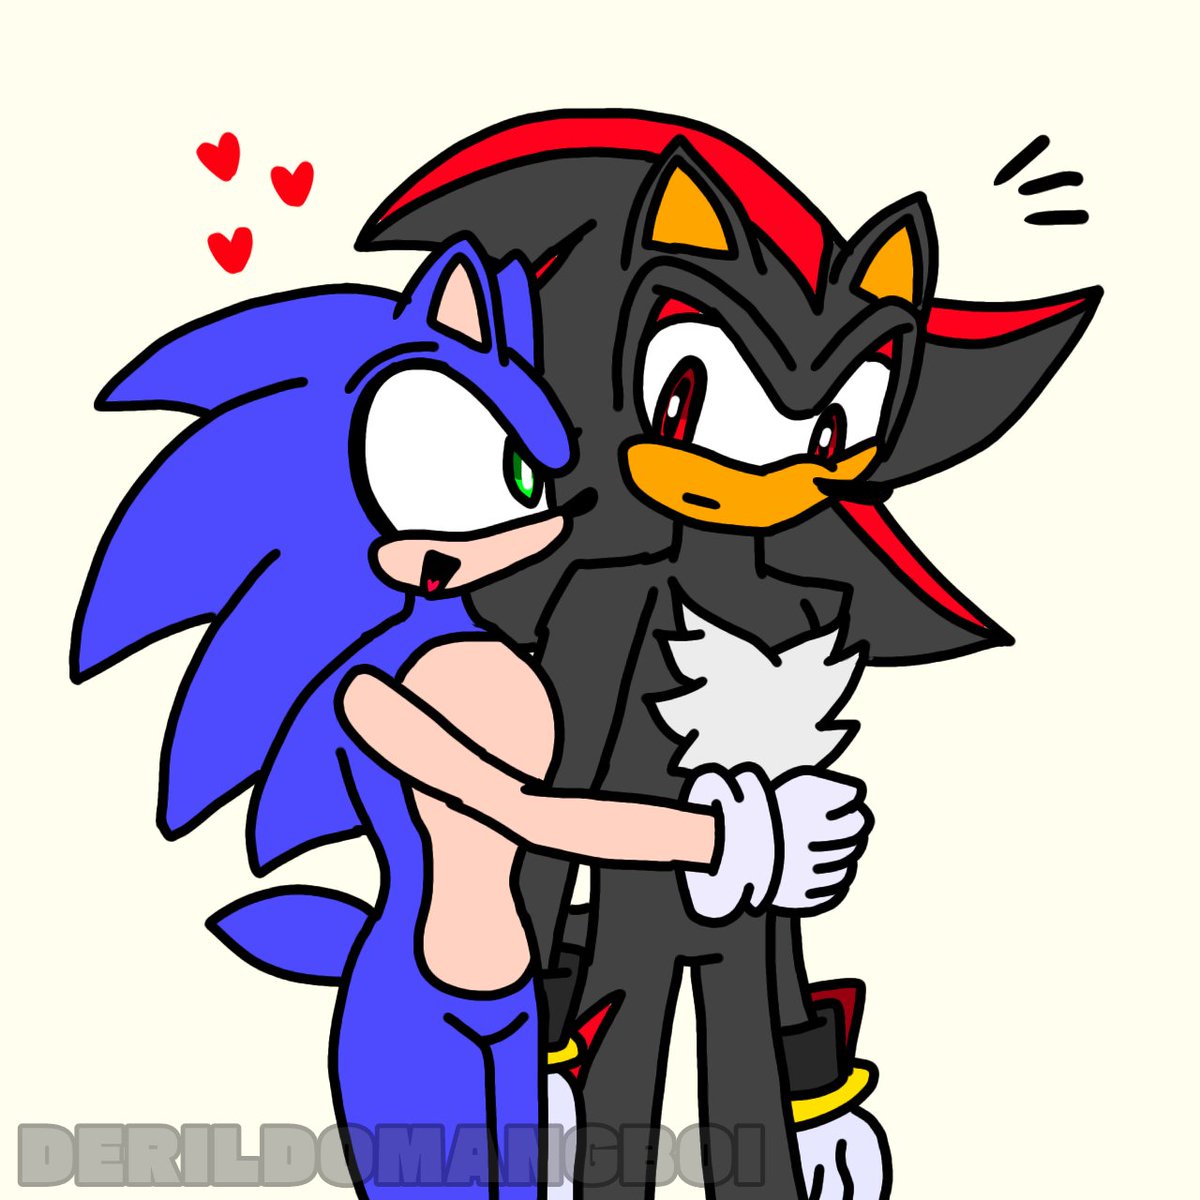 Guess who's back for more Gay Hedgehogs drawing?! :D

#sonadow #Shadonic #sonic #shadow #SonicTheHedgehog #ShadowTheHedghog